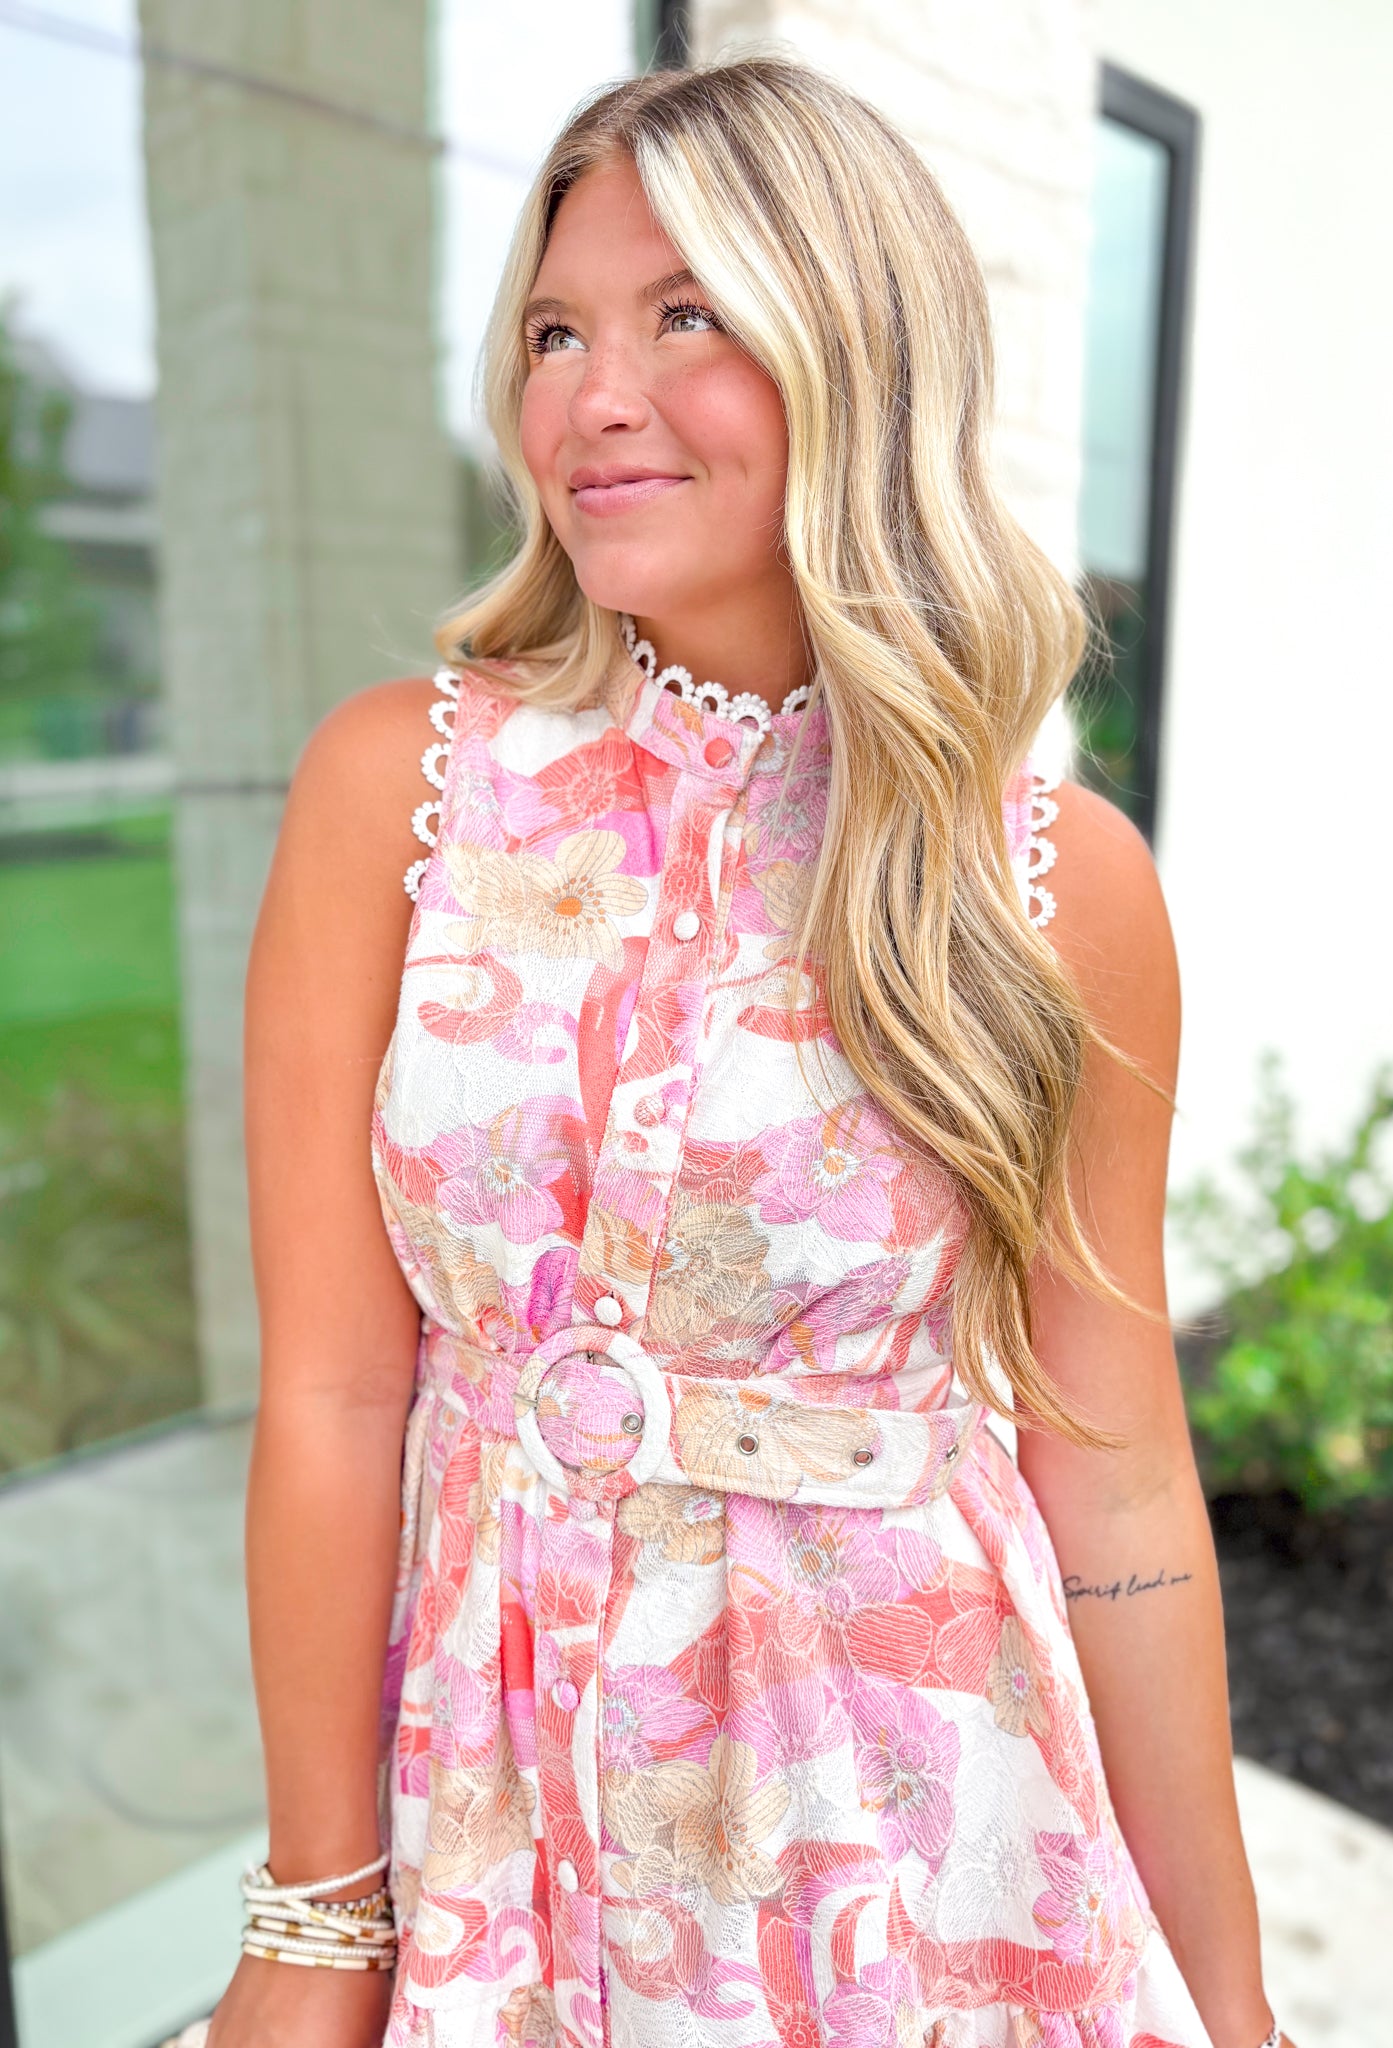 Sending Love Notes Floral Dress, pink, orange, red, yellow and off white sleeveless high-neck floral button down dress with white lace texture, white lace trimming on the arm holes and around the neck as well as a matching belt